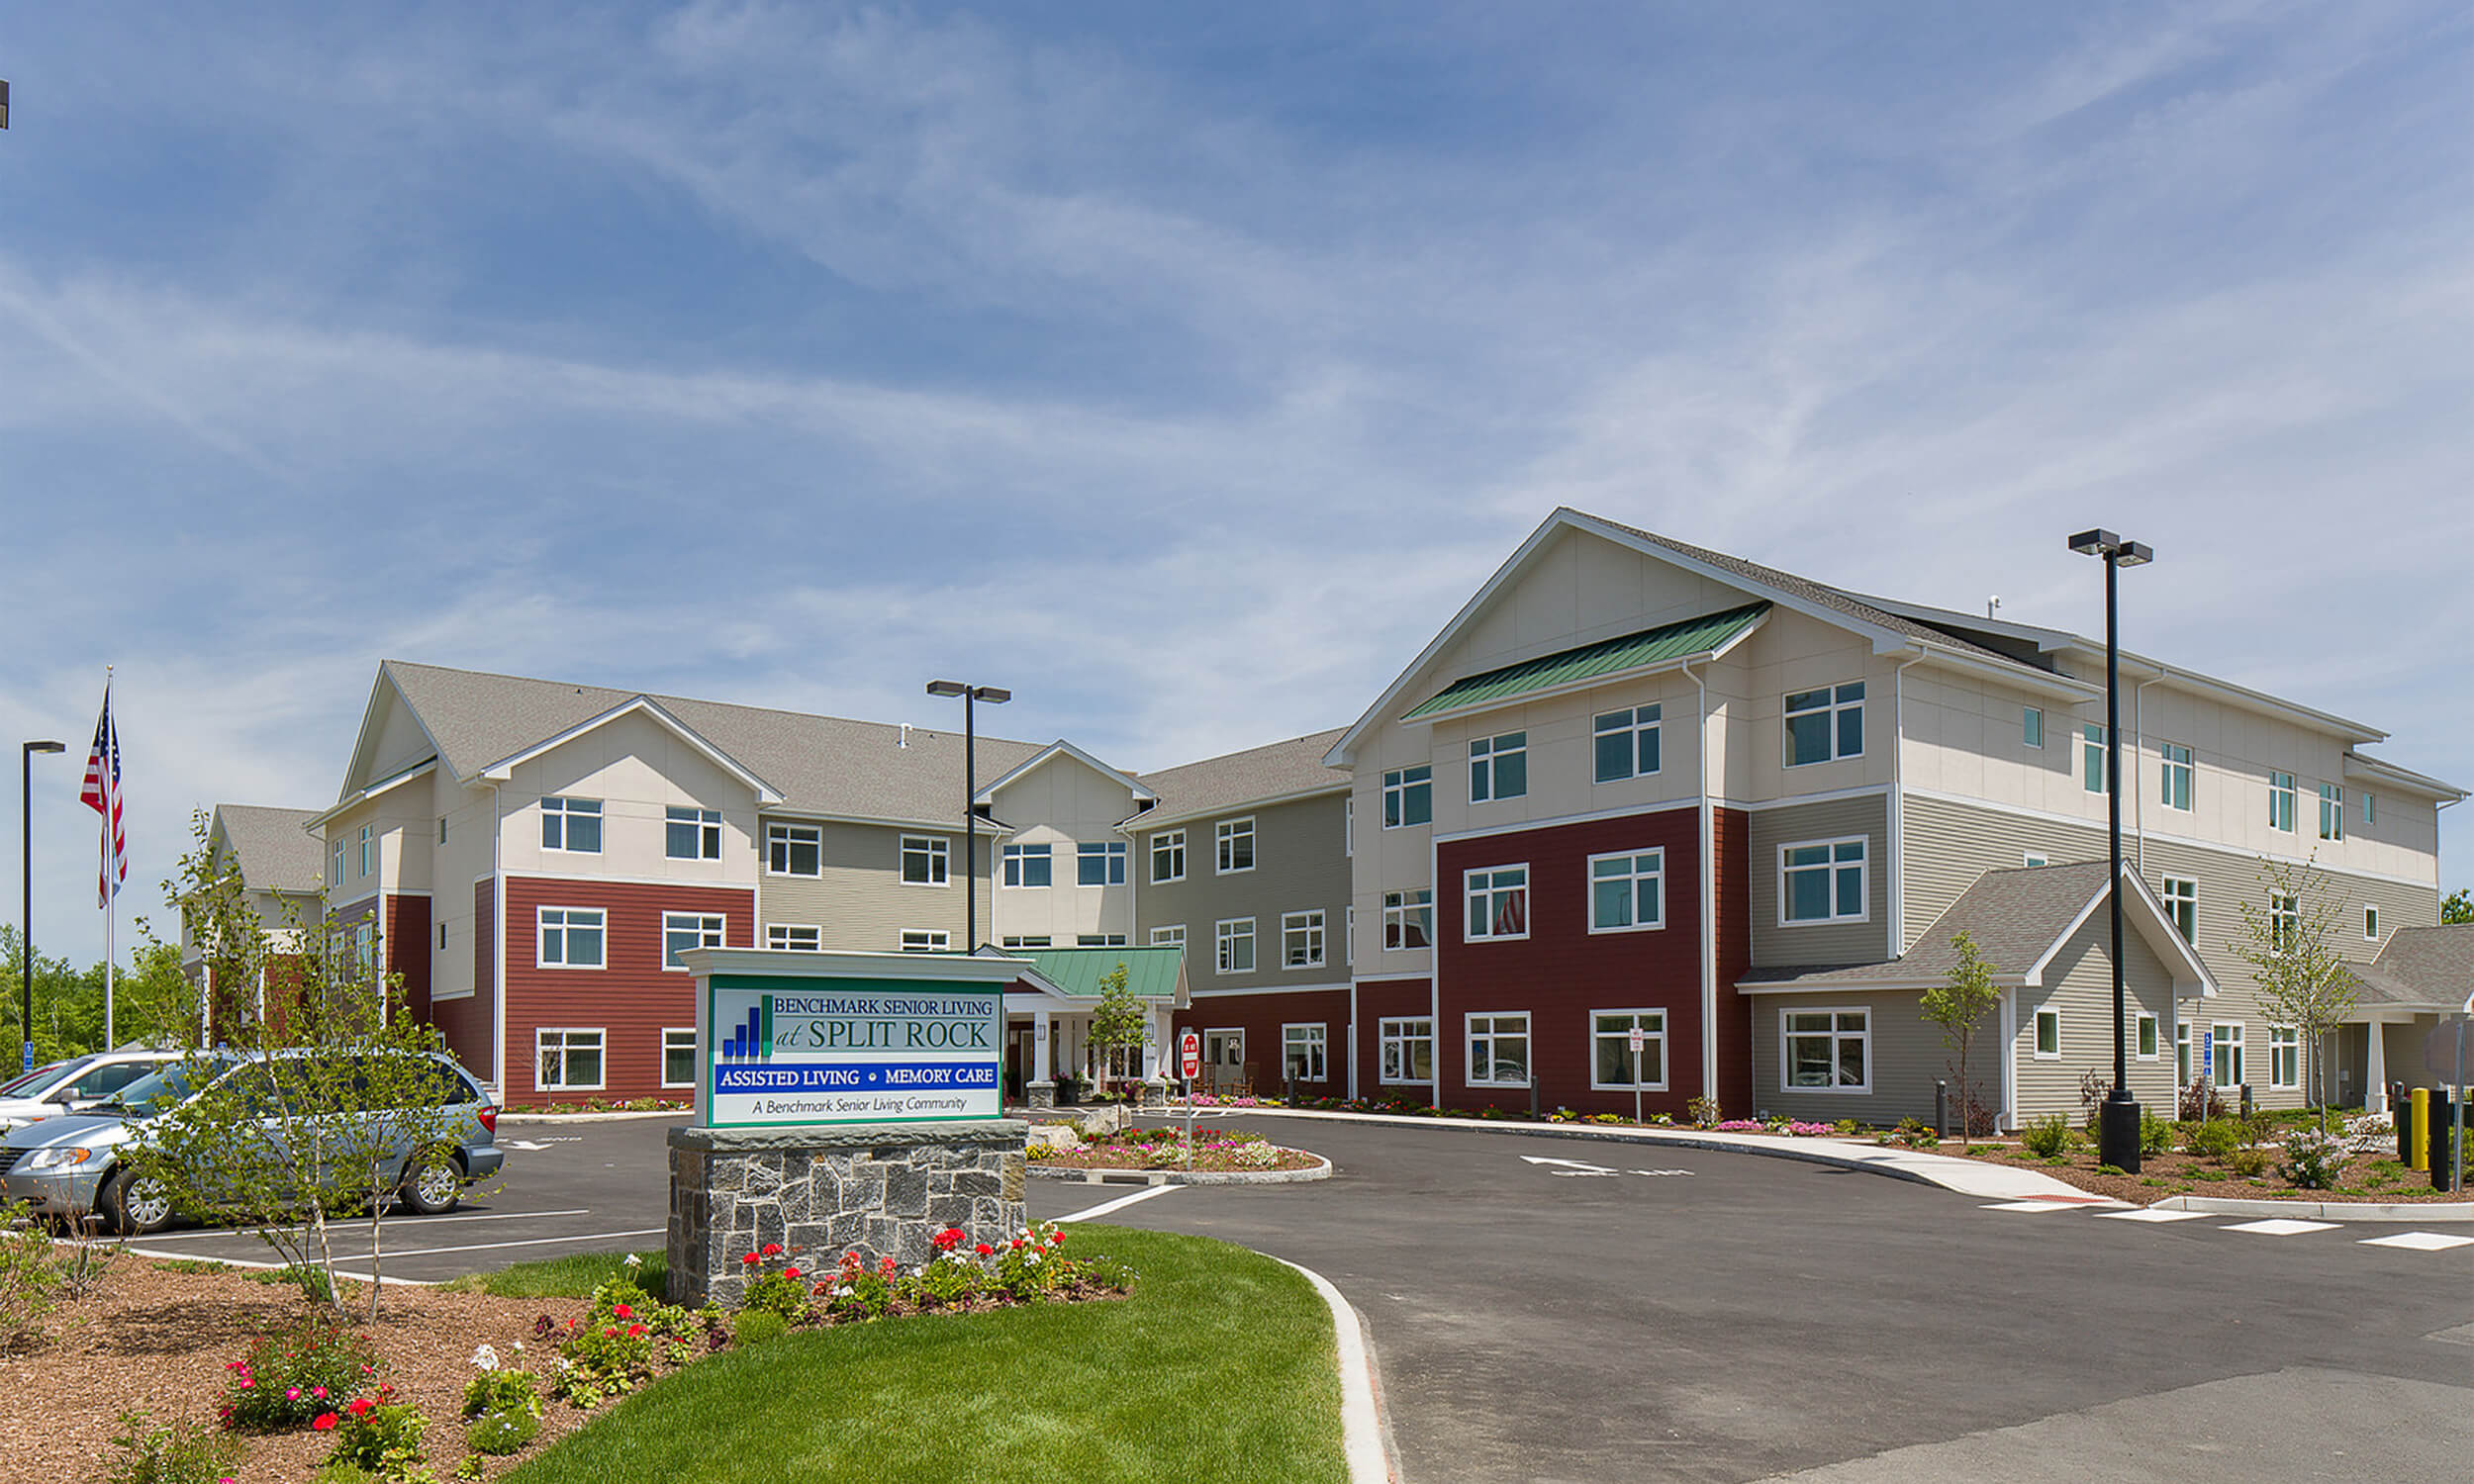 Exterior view of the main entrance to Benchmark Village at Split Rock senior living facility. The multi-story building features a red and white facade with a drive-thru parking lot area in front.